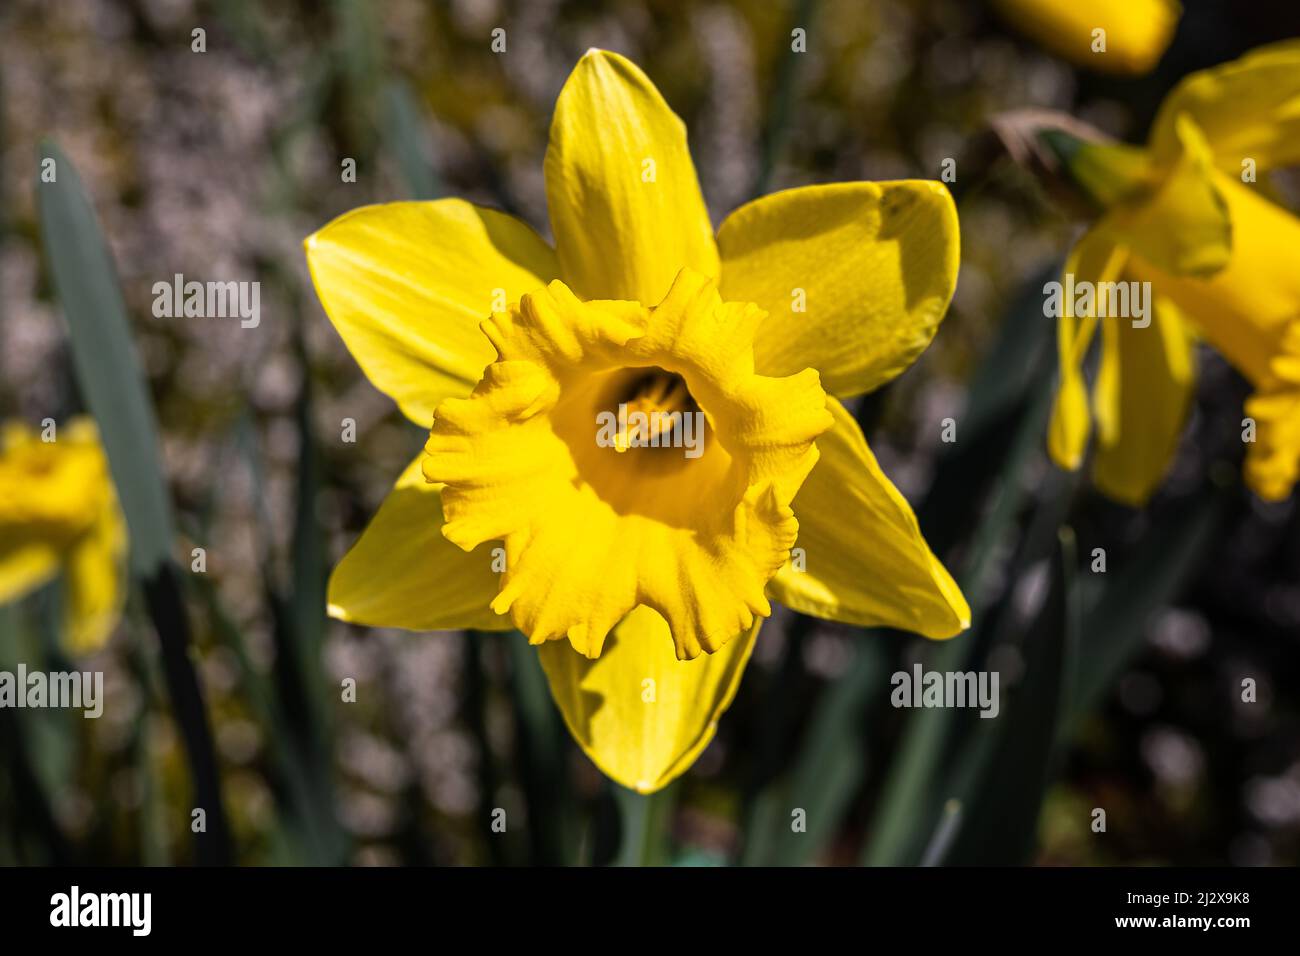 Narcissus 'Standard Value' Daffodil Division 1 Trumpet Stock Photo